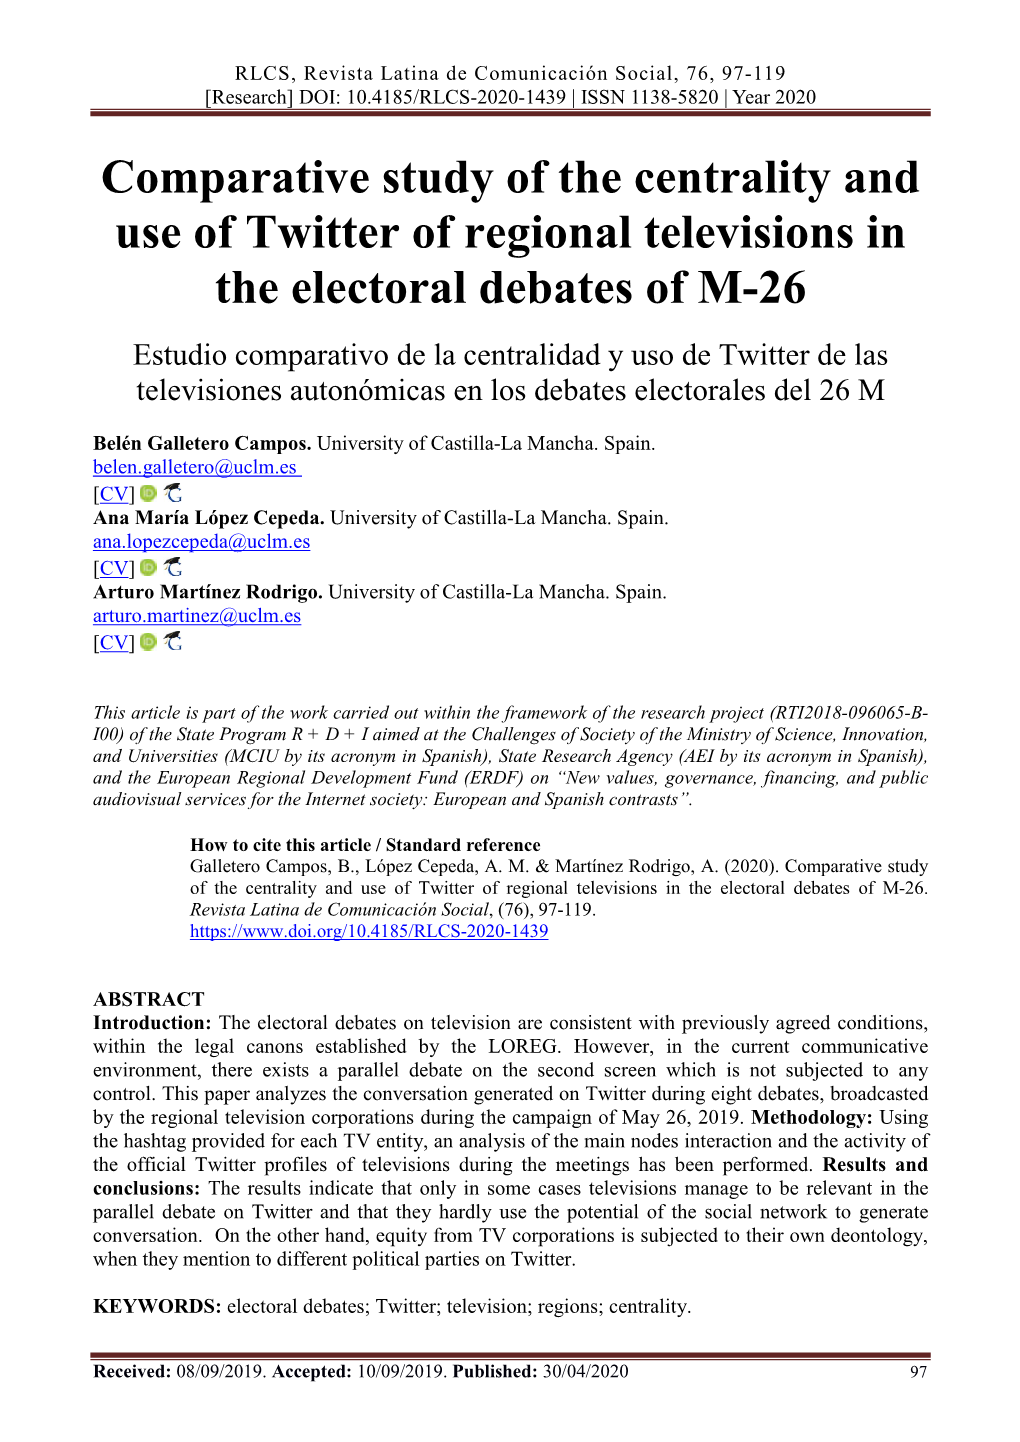 Comparative Study of the Centrality and Use of Twitter of Regional Televisions in the Electoral Debates of M-26